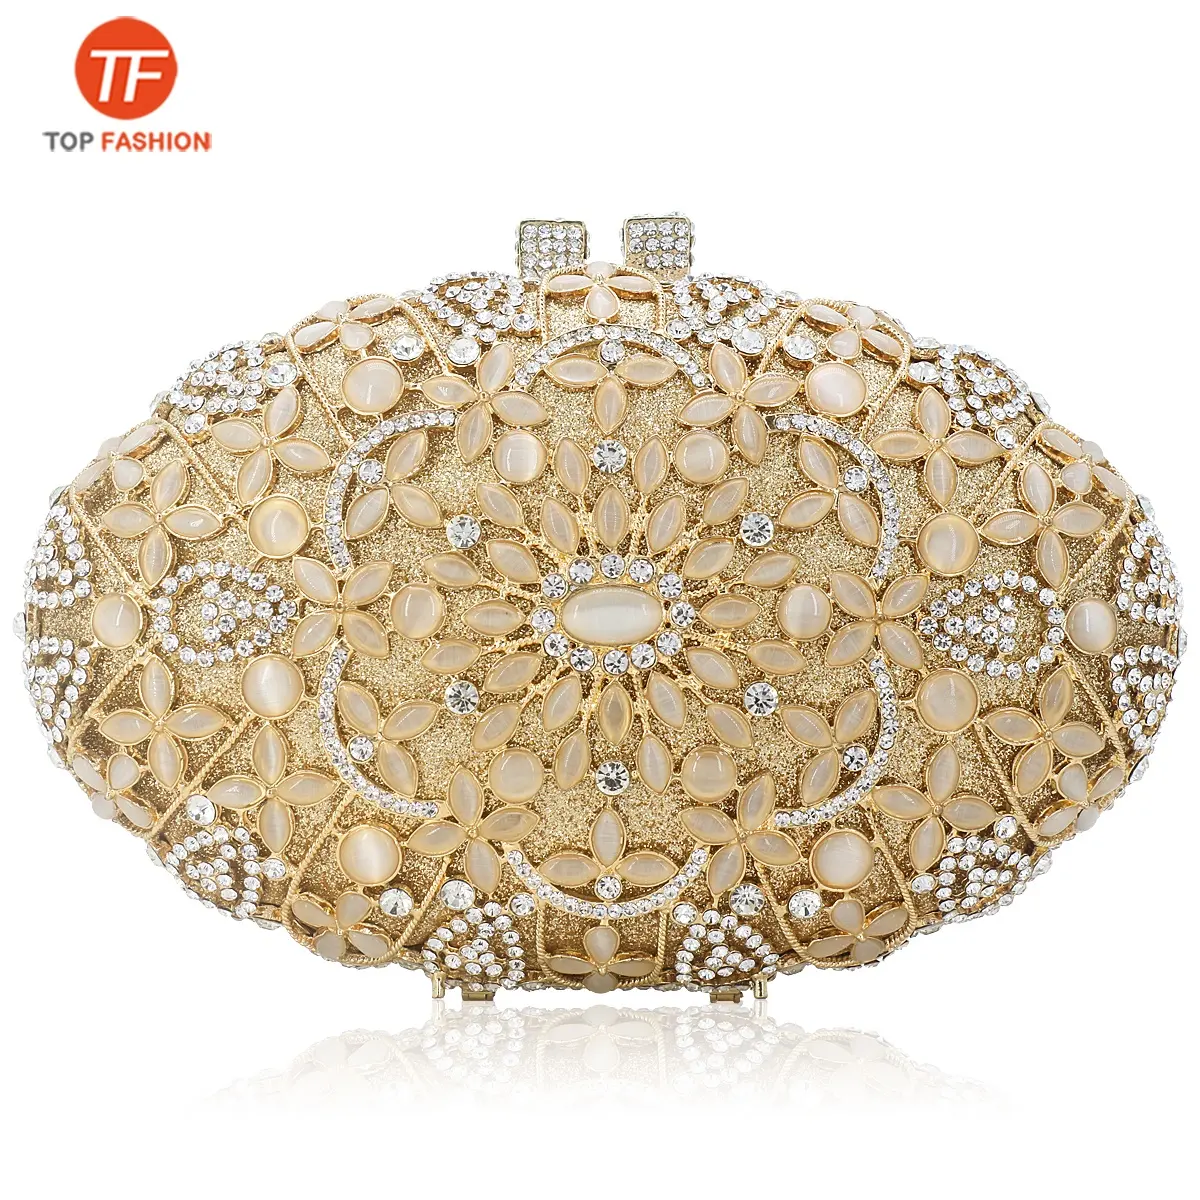 Factory wholesales Beautiful Opal Evening Bag Crystal Rhinestone Clutch Purse Expensive Evening Handbag for Party